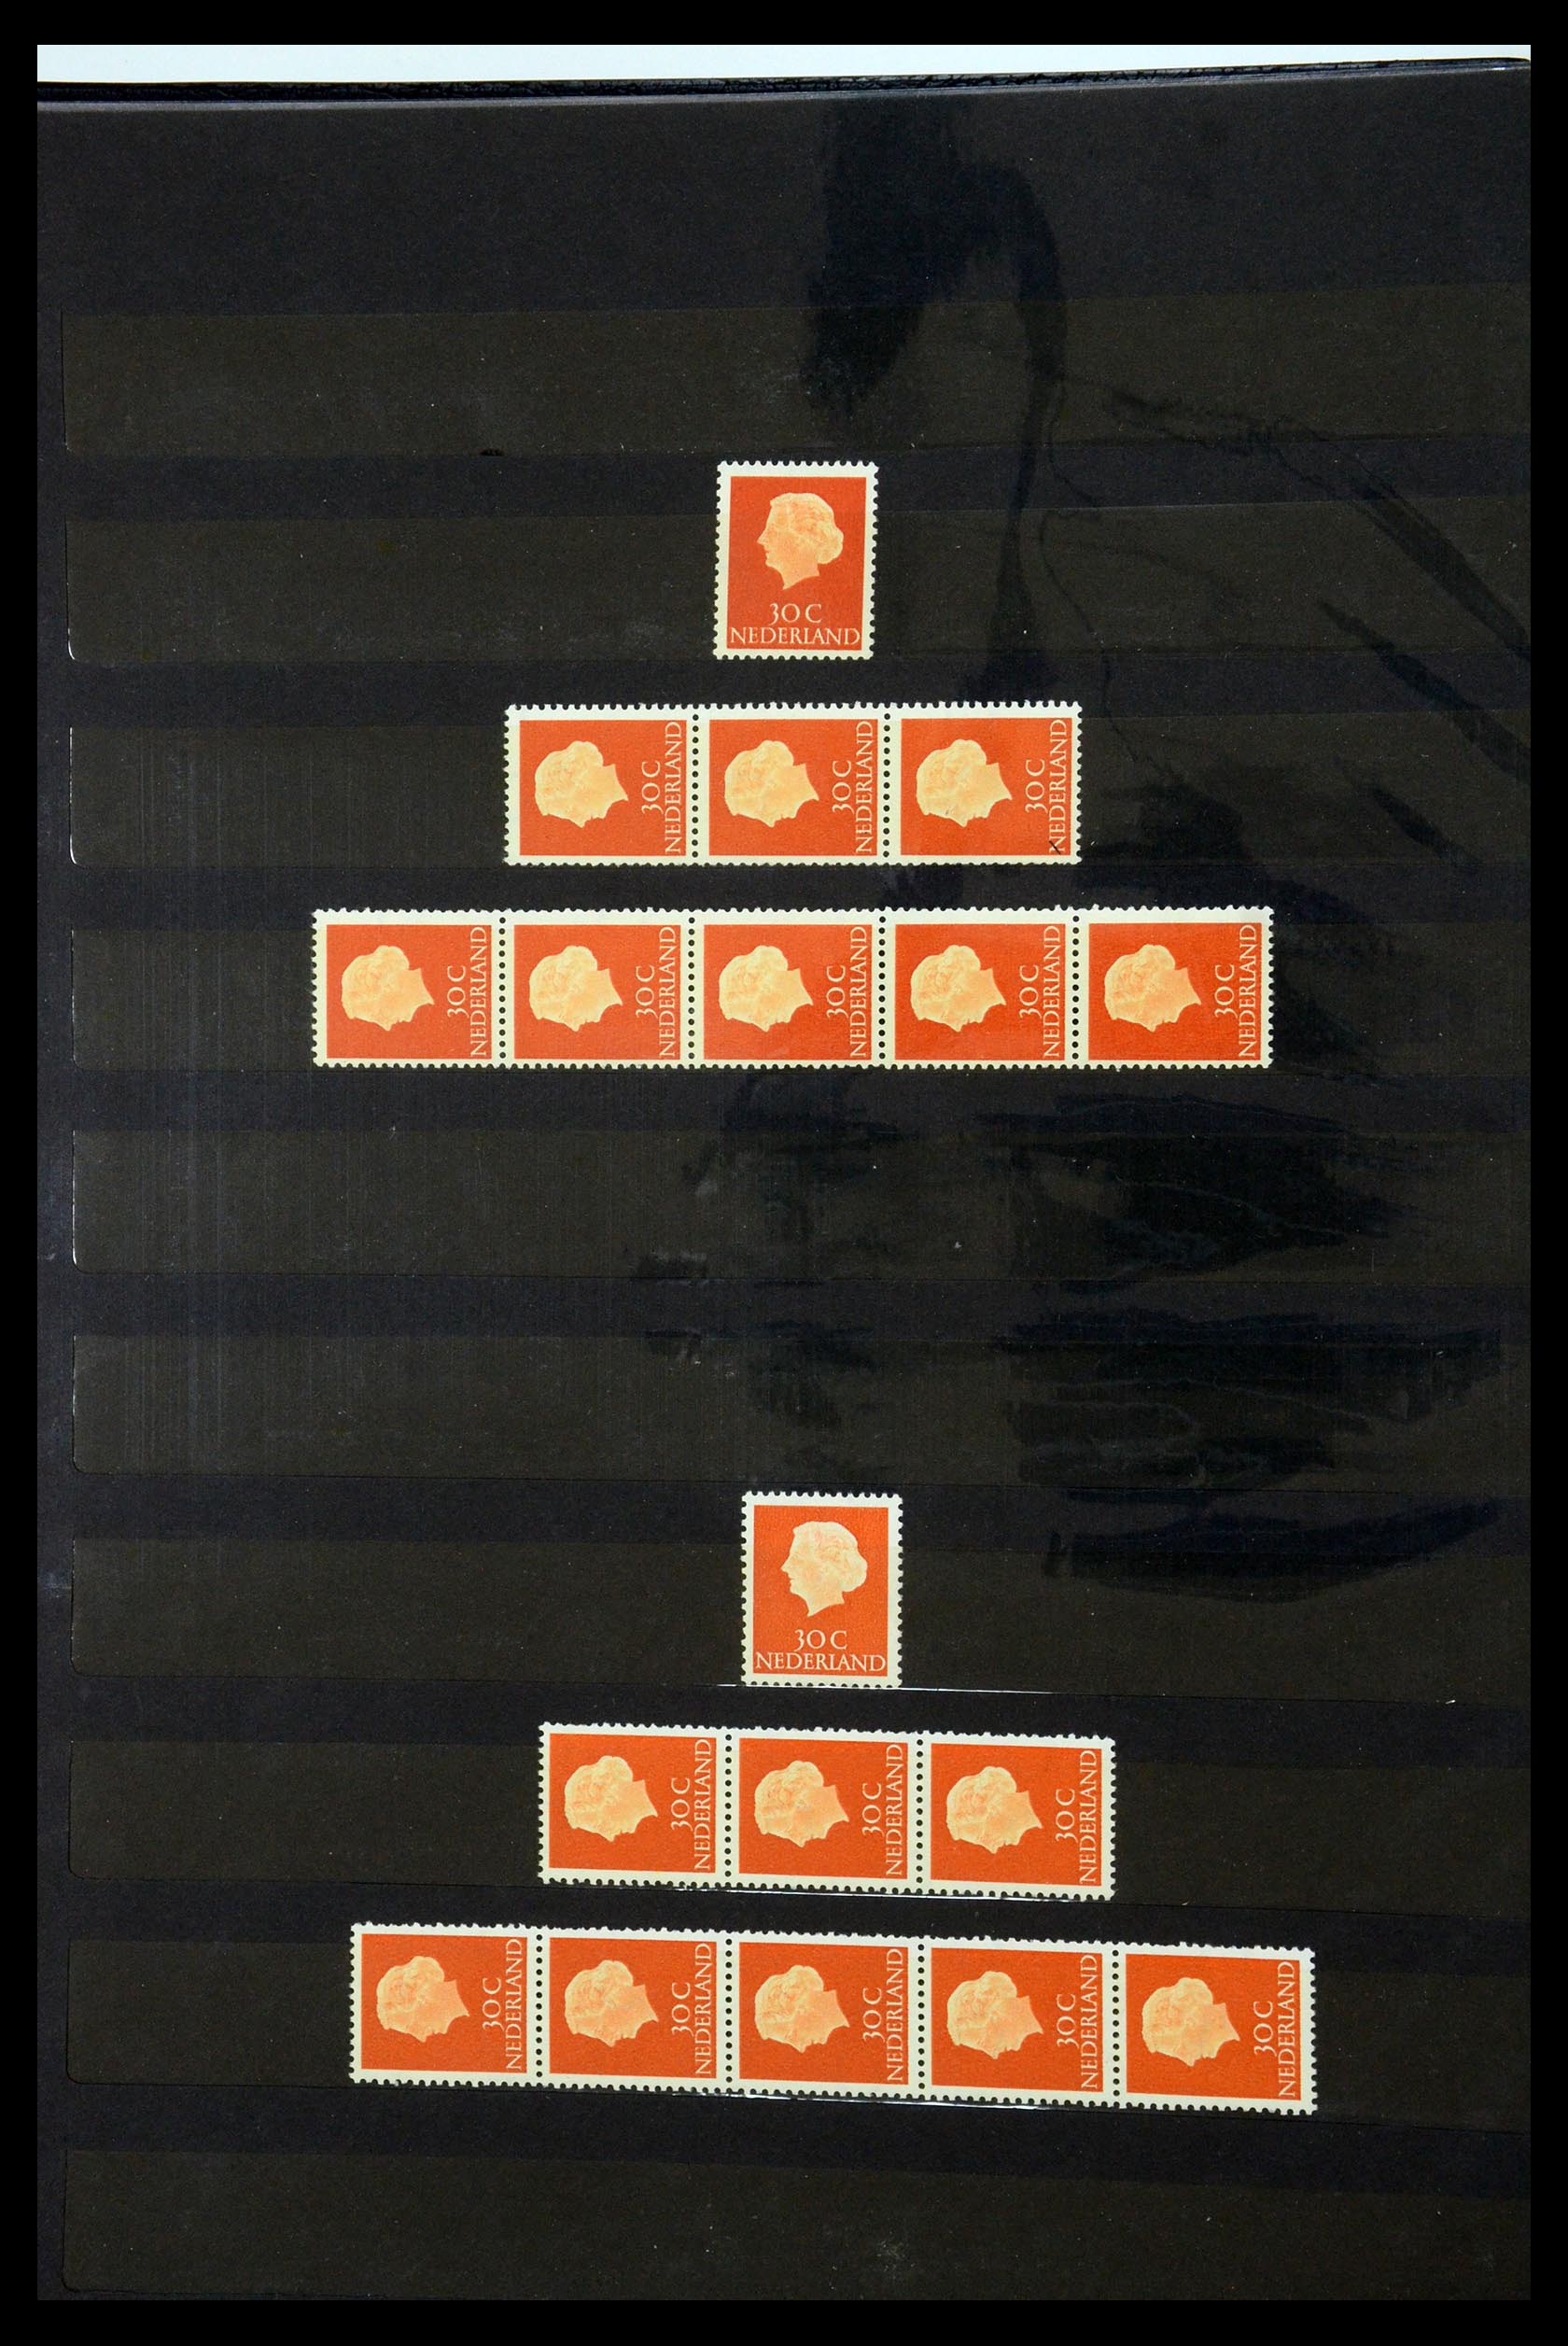 35543 024 - Stamp Collection 35543 Netherlands coilstamps 1965-1972.